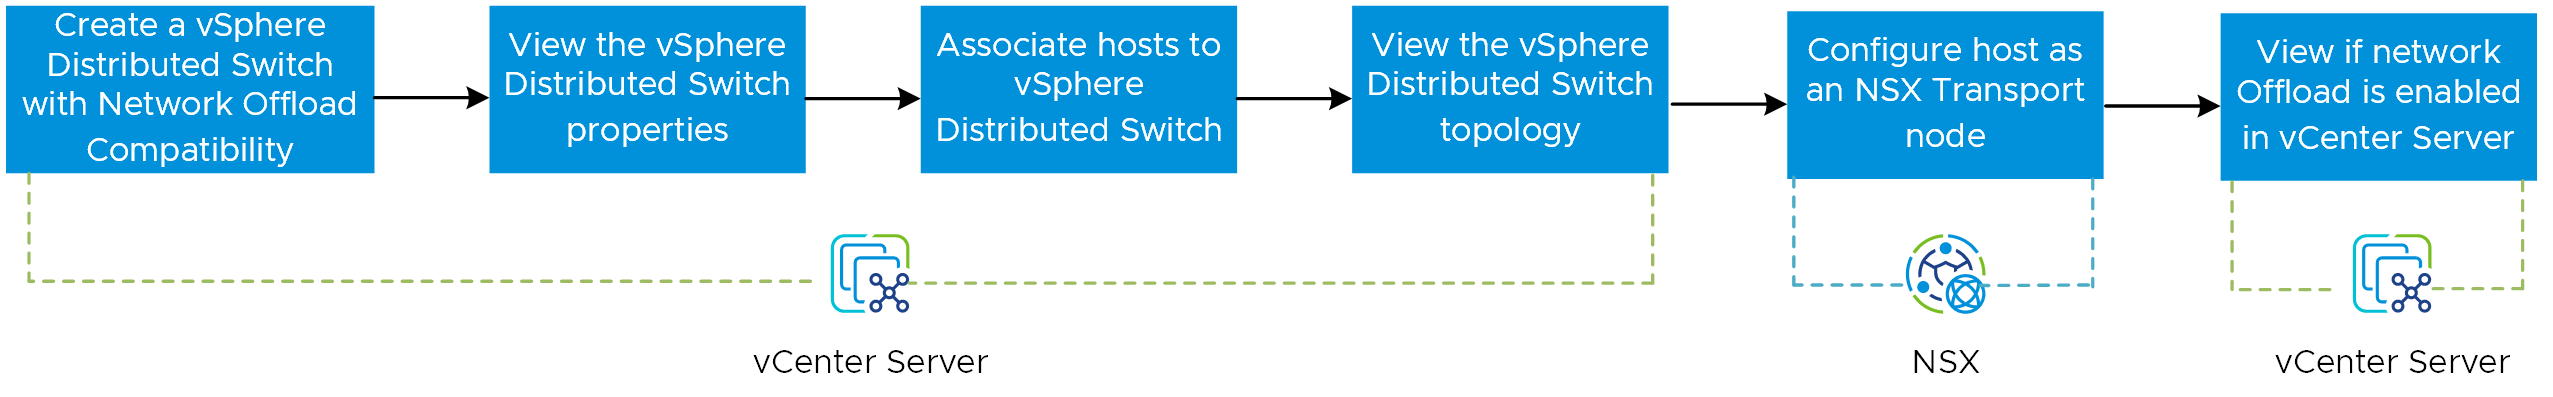 Image depicts the workflow to enable the network offloads capability